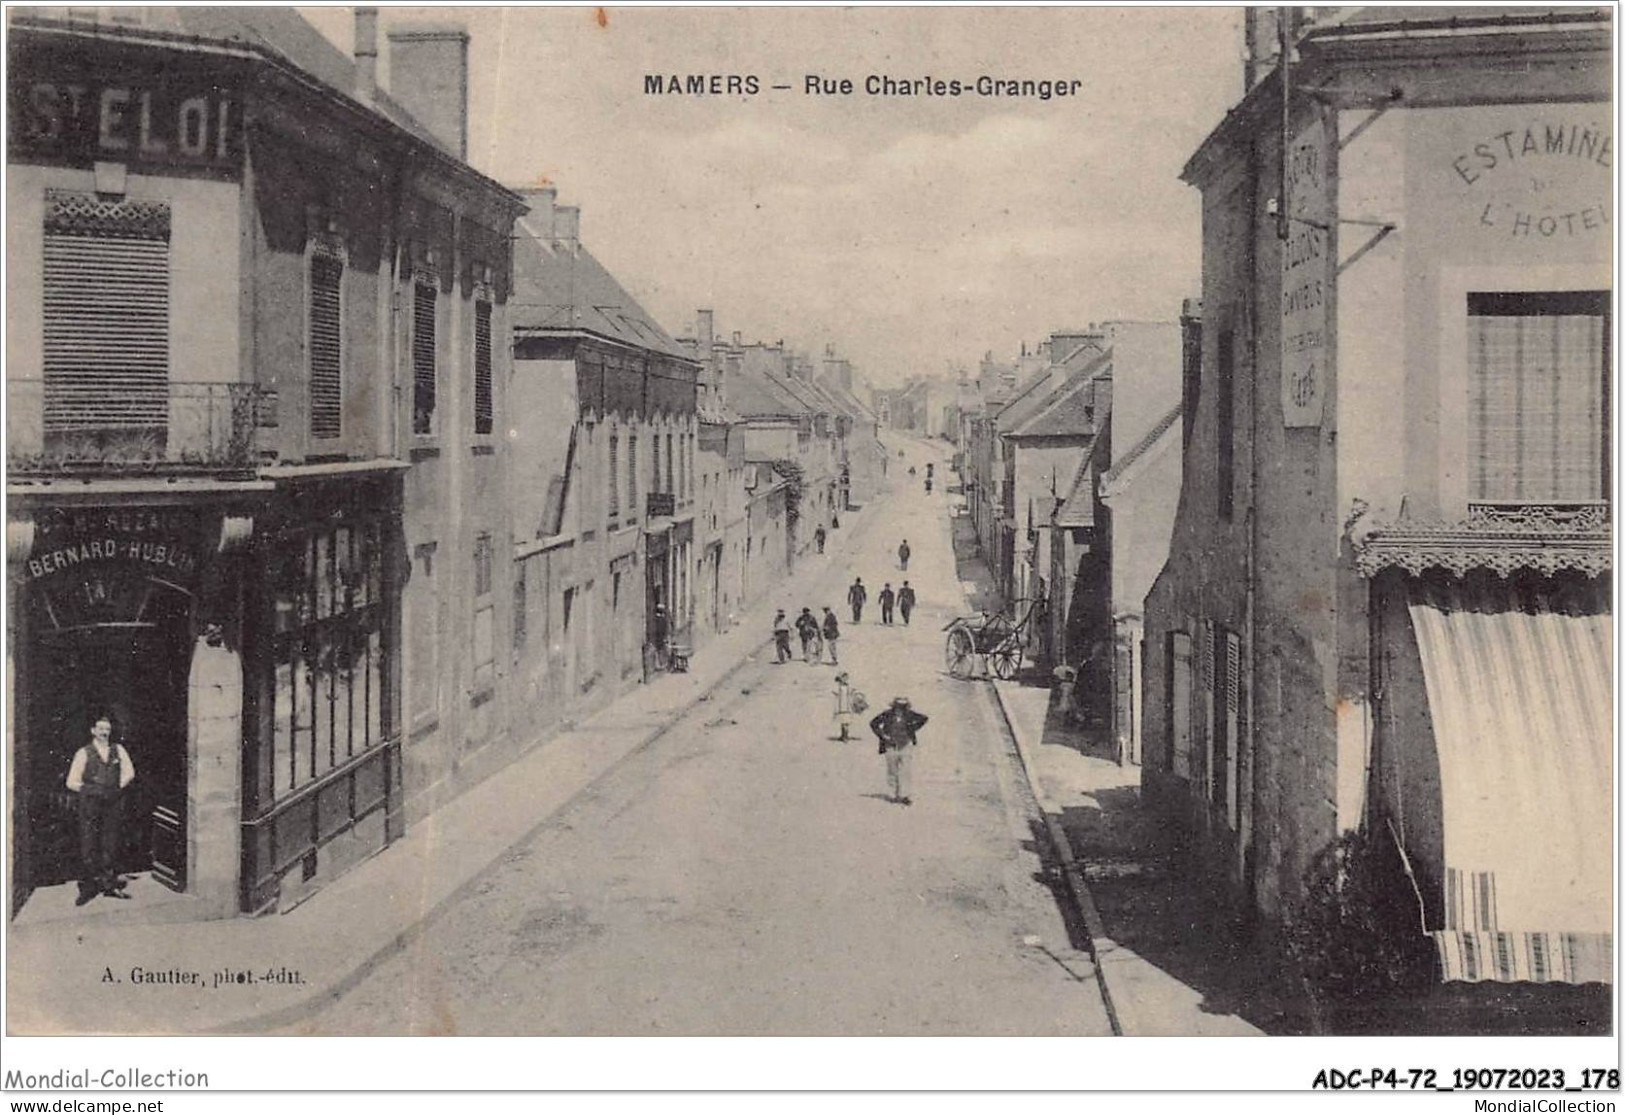 ADCP4-72-0399 - MAMERS - Rue Charles-granger  - Mamers